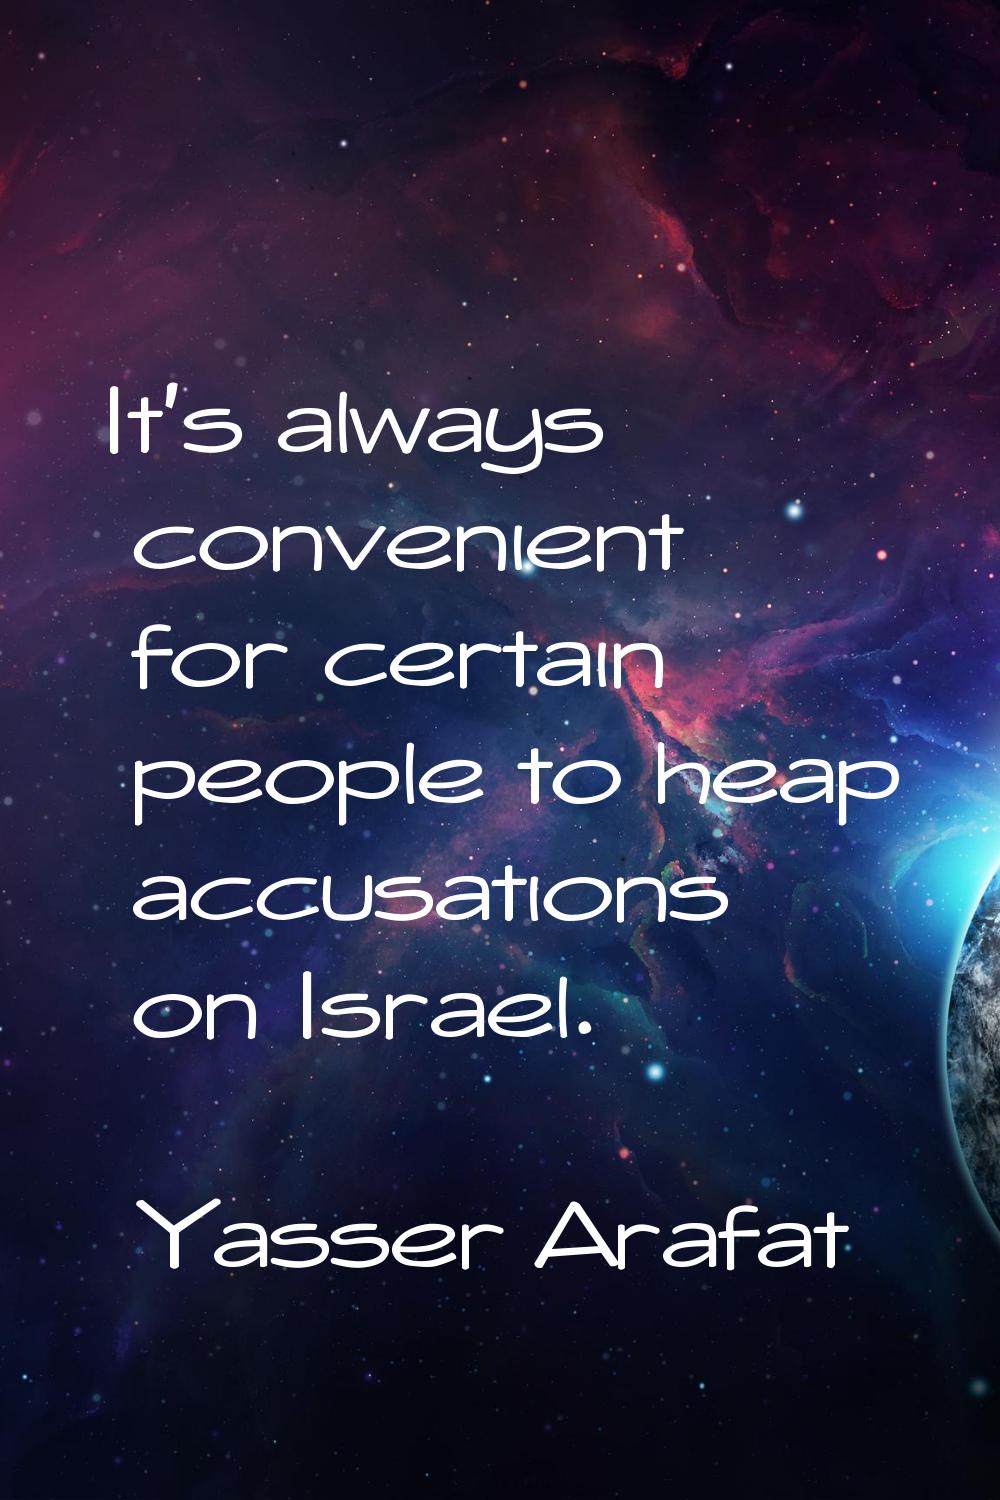 It's always convenient for certain people to heap accusations on Israel.